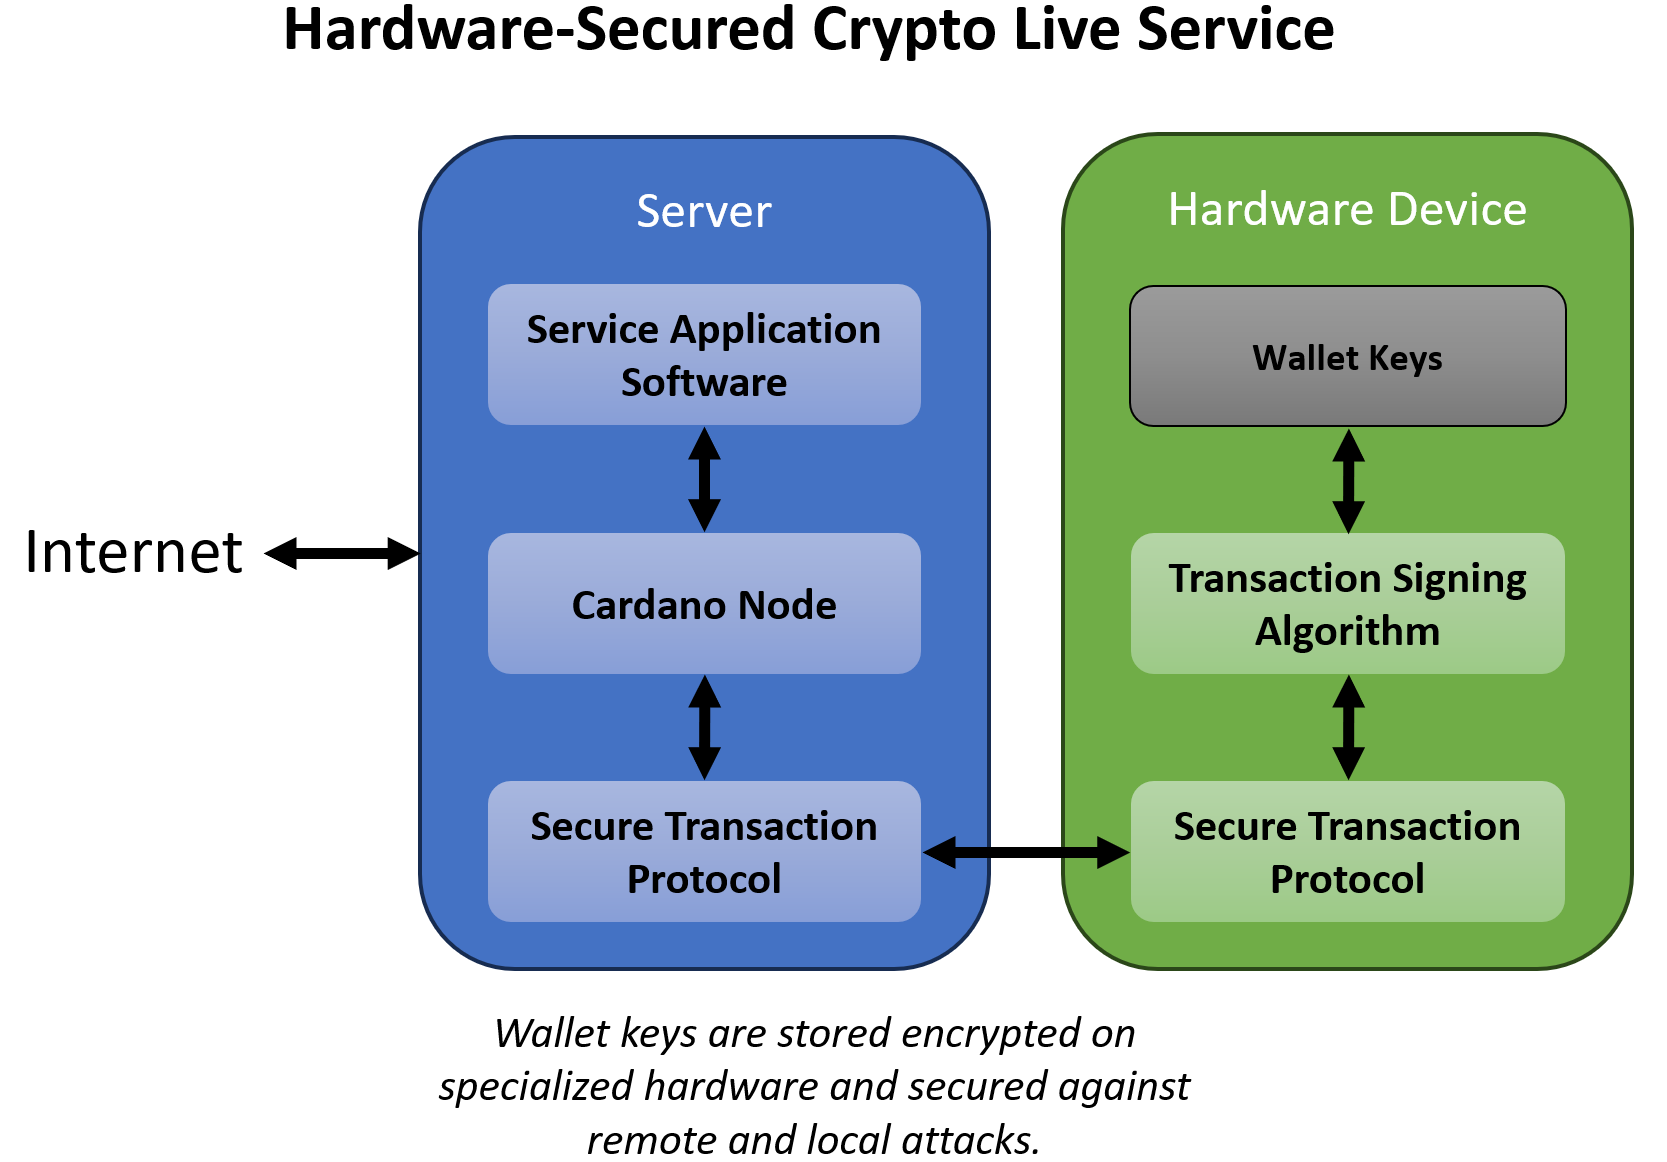 Hardware-Secured Crypto Live Service: Wallet keys are stored encrypted on specialized hardware and secured against remote and local attacks.